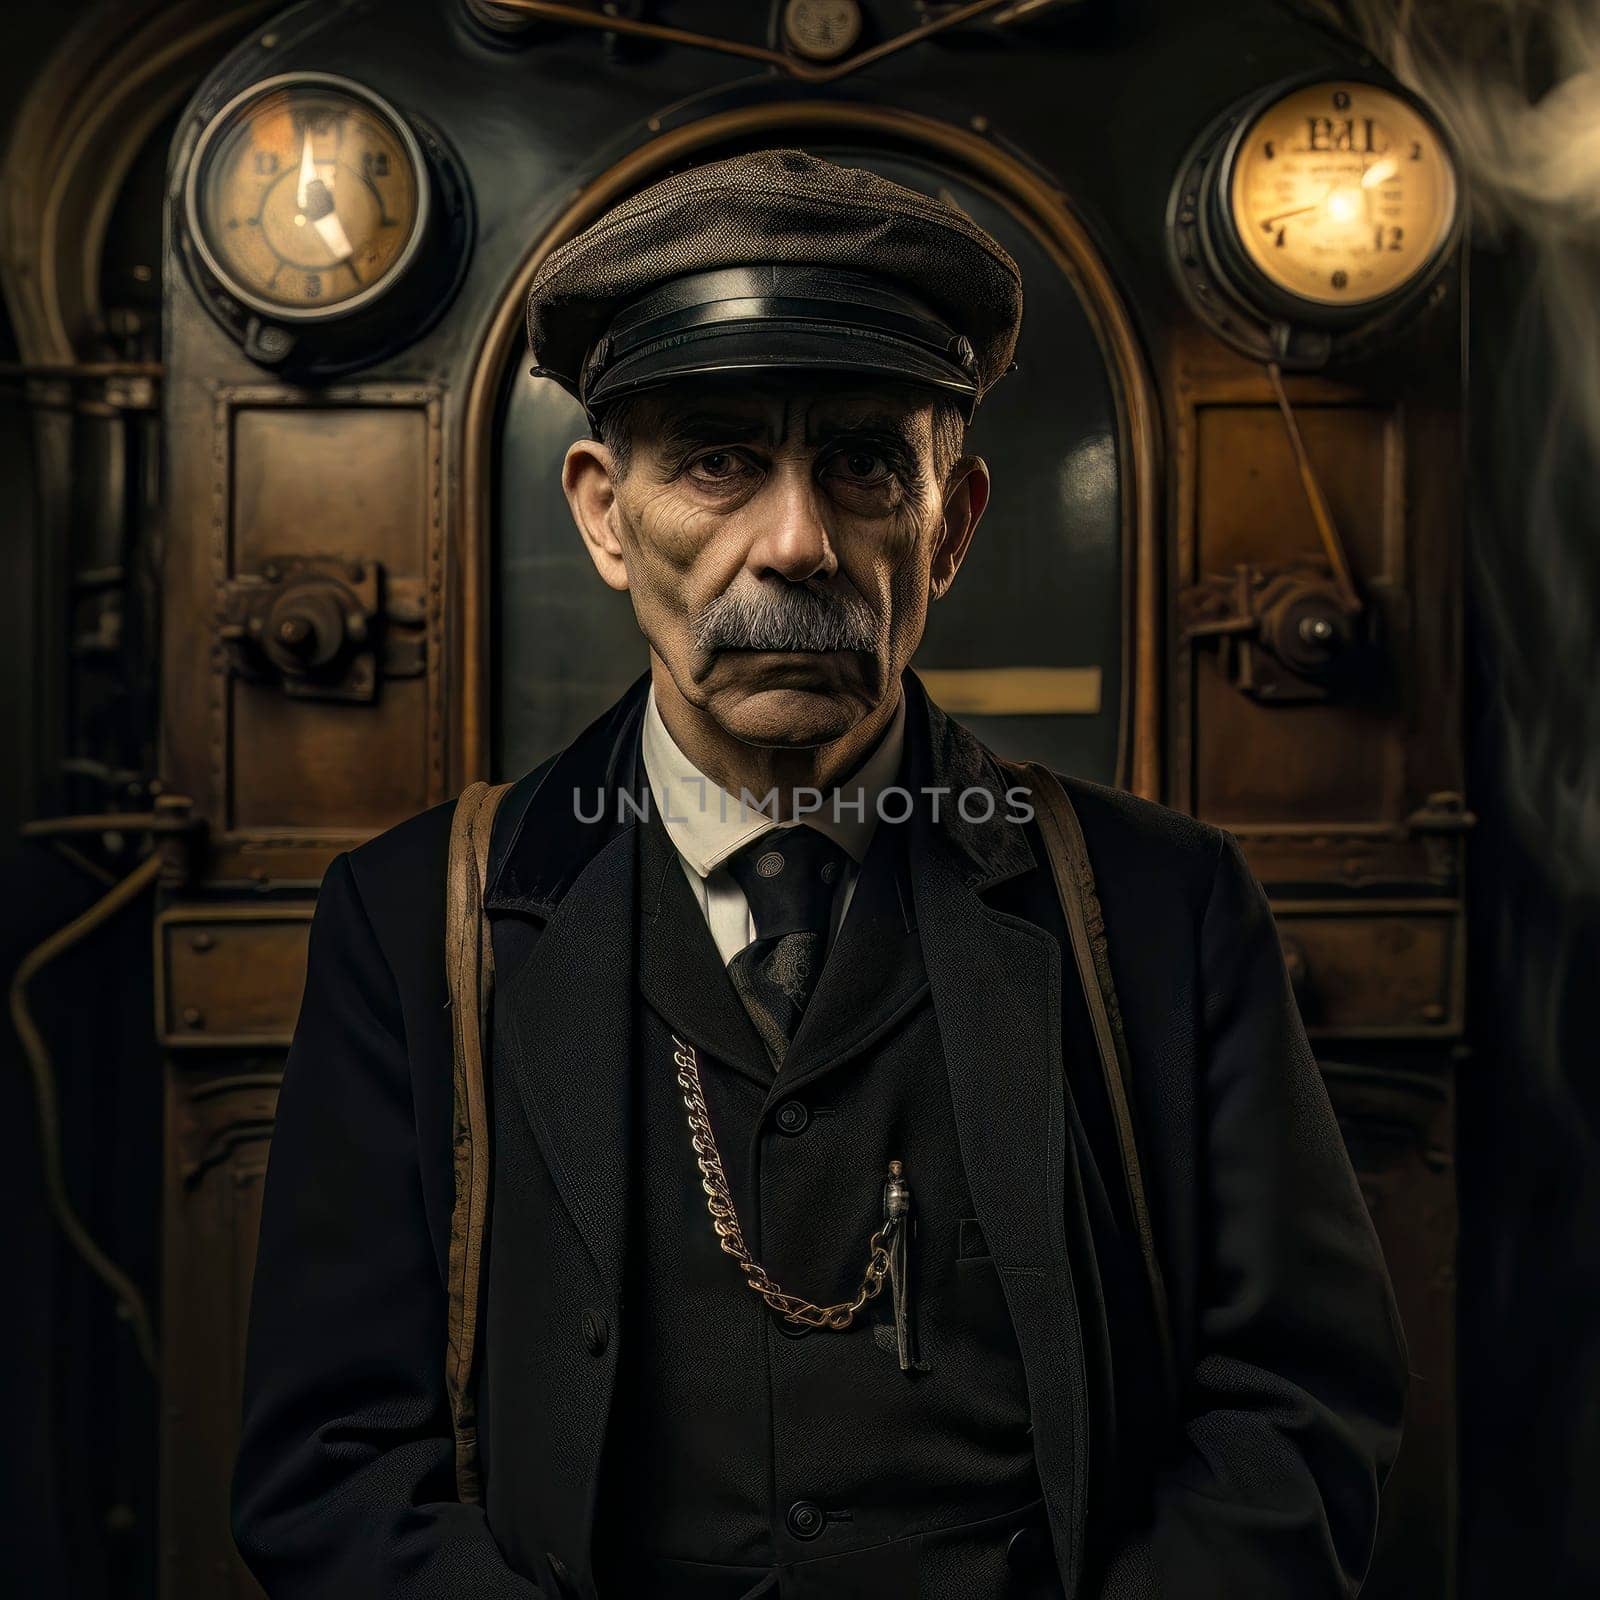 An evocative image capturing the presence of an aged train conductor, showcasing wisdom and experience.